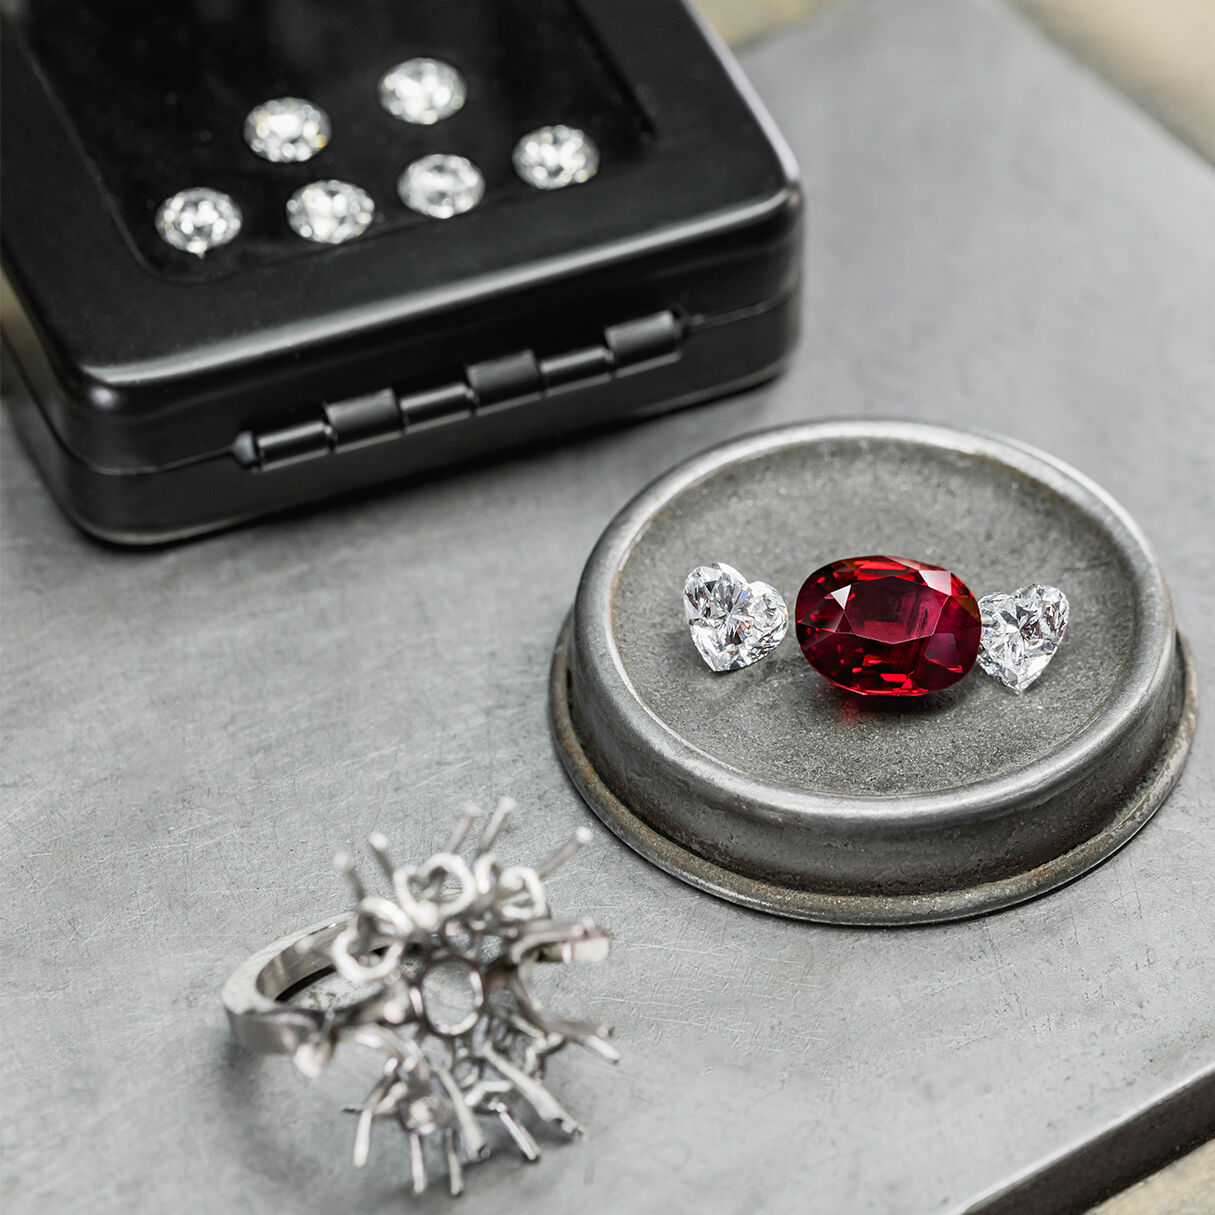 Image of Graff Ruby High Jewellery ring being created in Graff London workshop